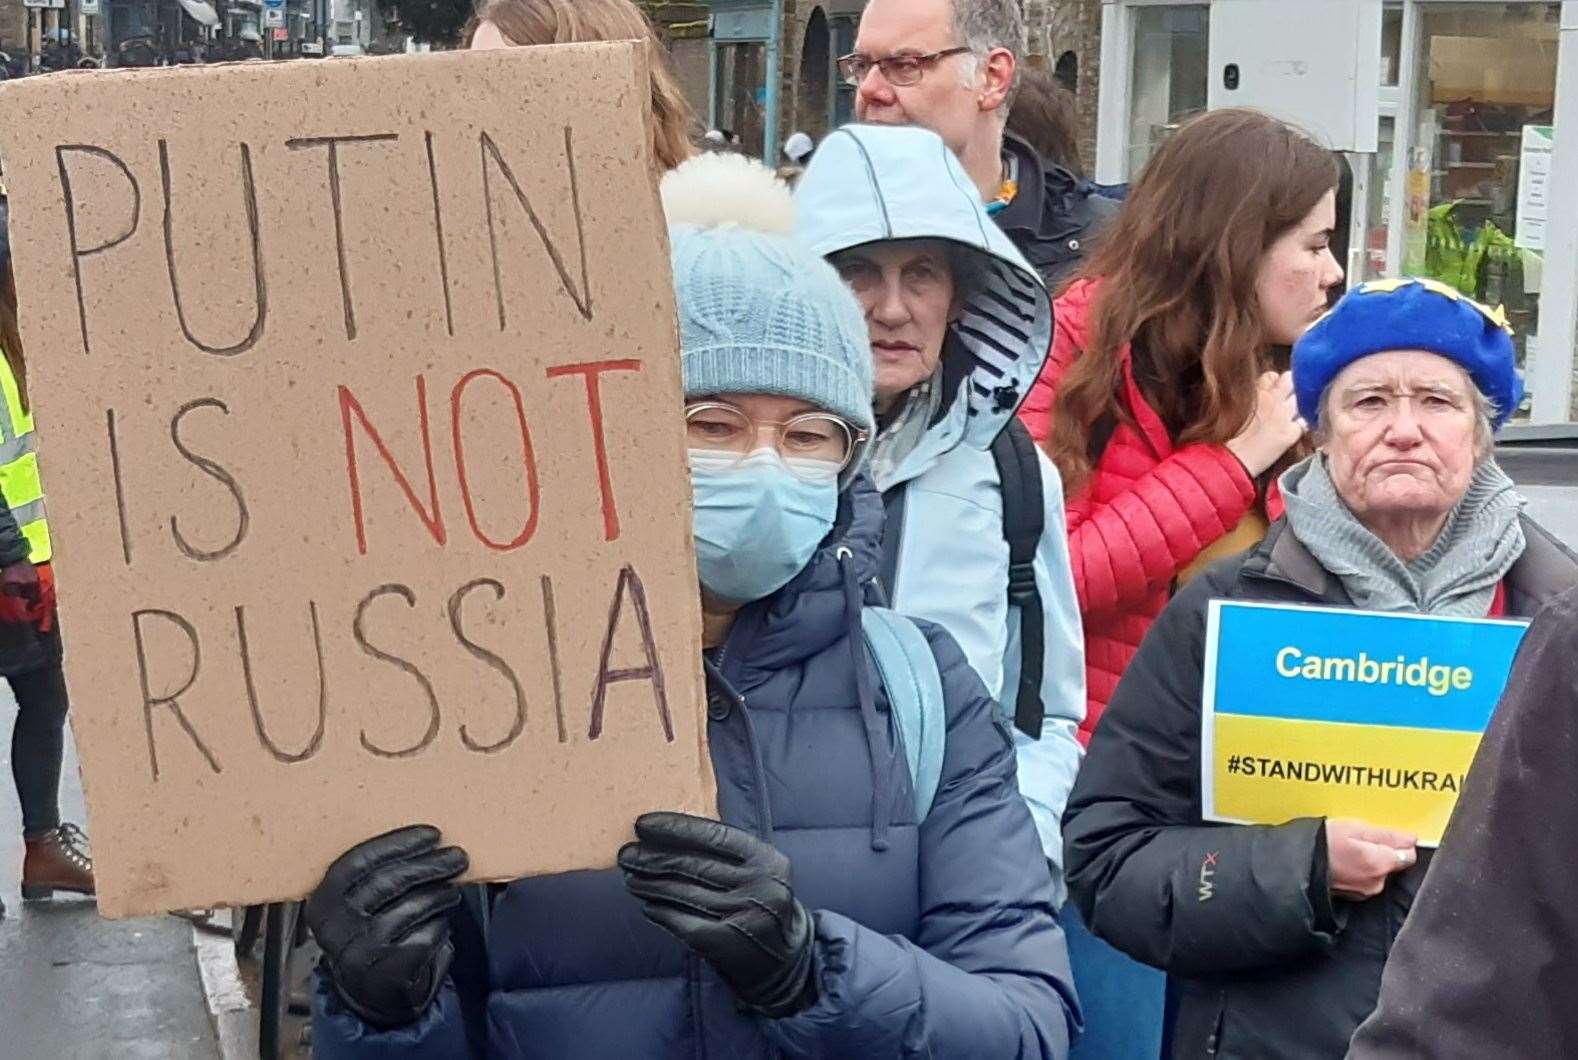 Protesters at a Stand With Ukraine march make it clear Russian premiere Vladimir Putin does not have the support of all citizens